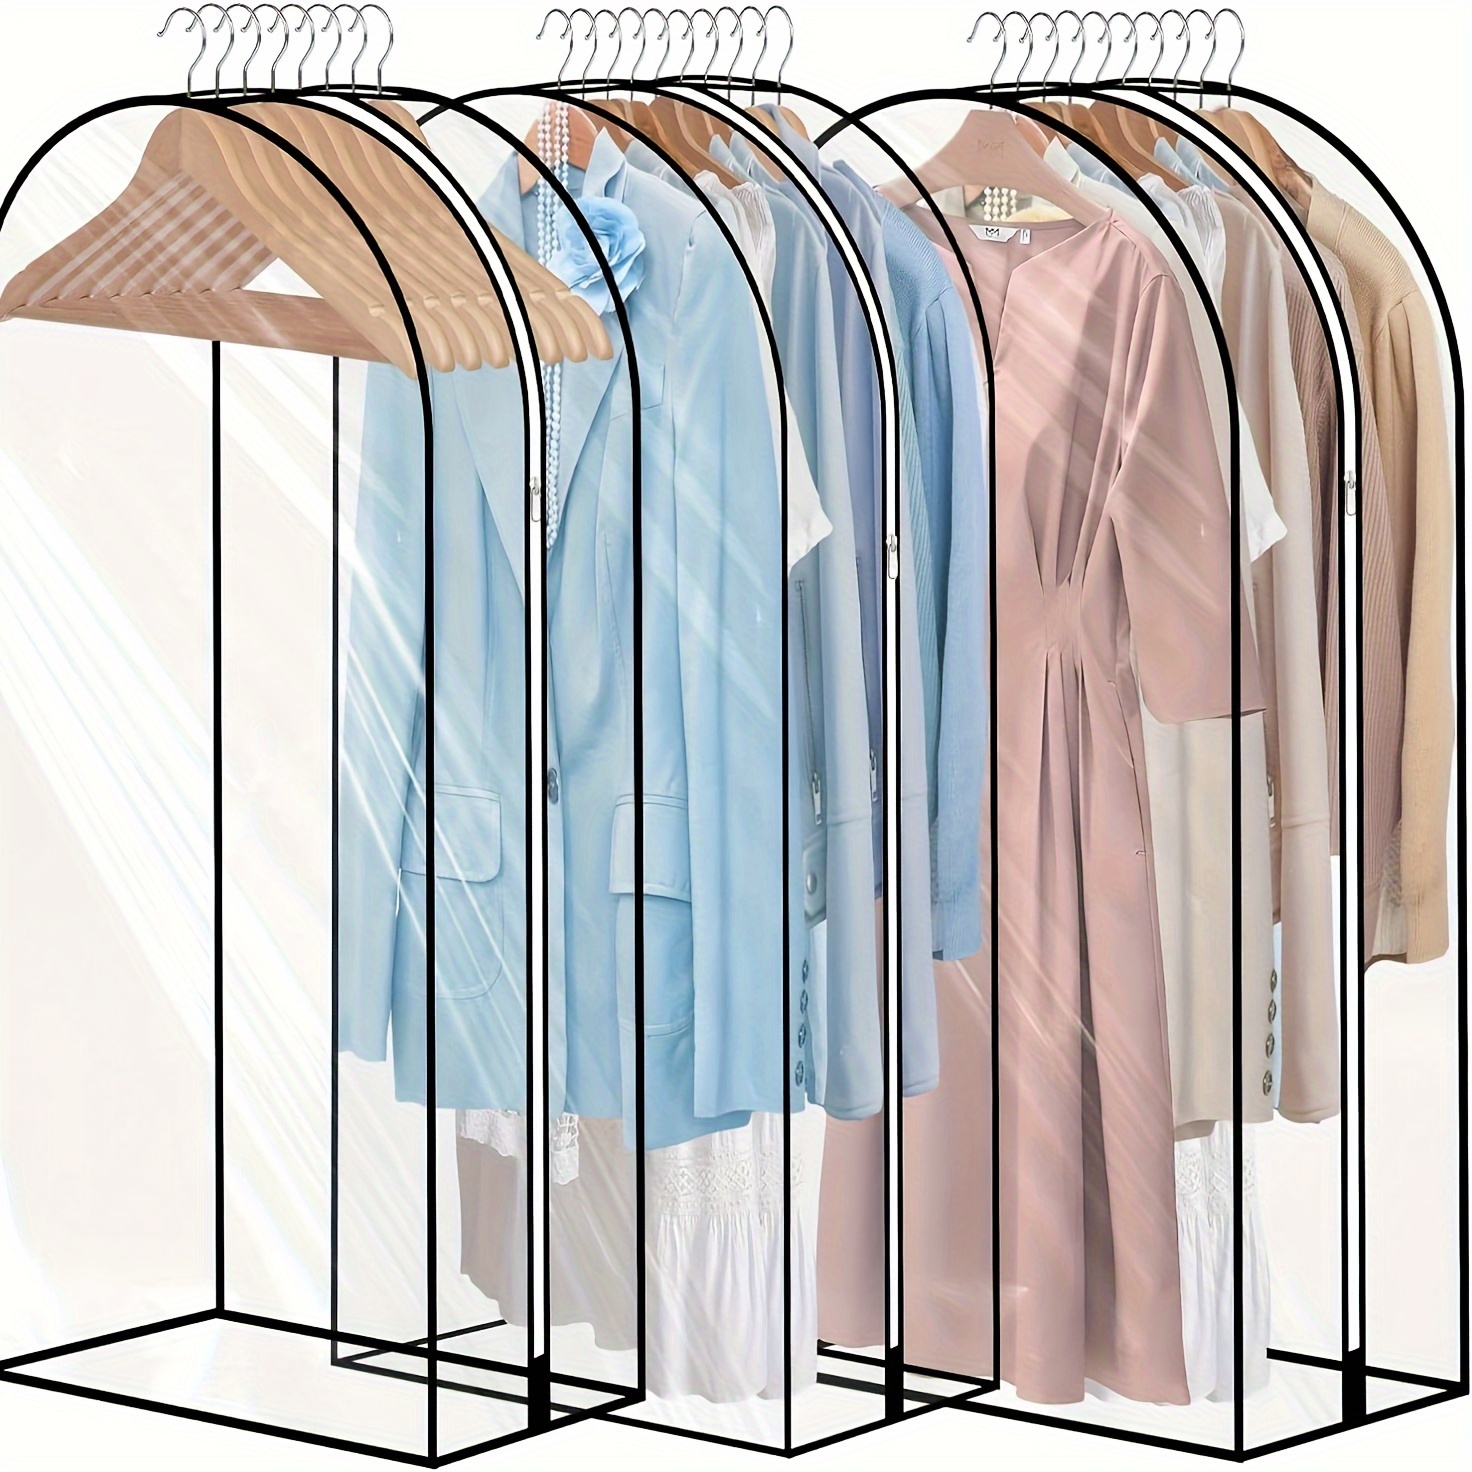 

12 "pleated Fully Transparent Clothing Bag 40" For Hanging Clothes Storage, Clothing Bag For Storing Jackets, Sweaters, Jackets, Dresses (3 Packs)